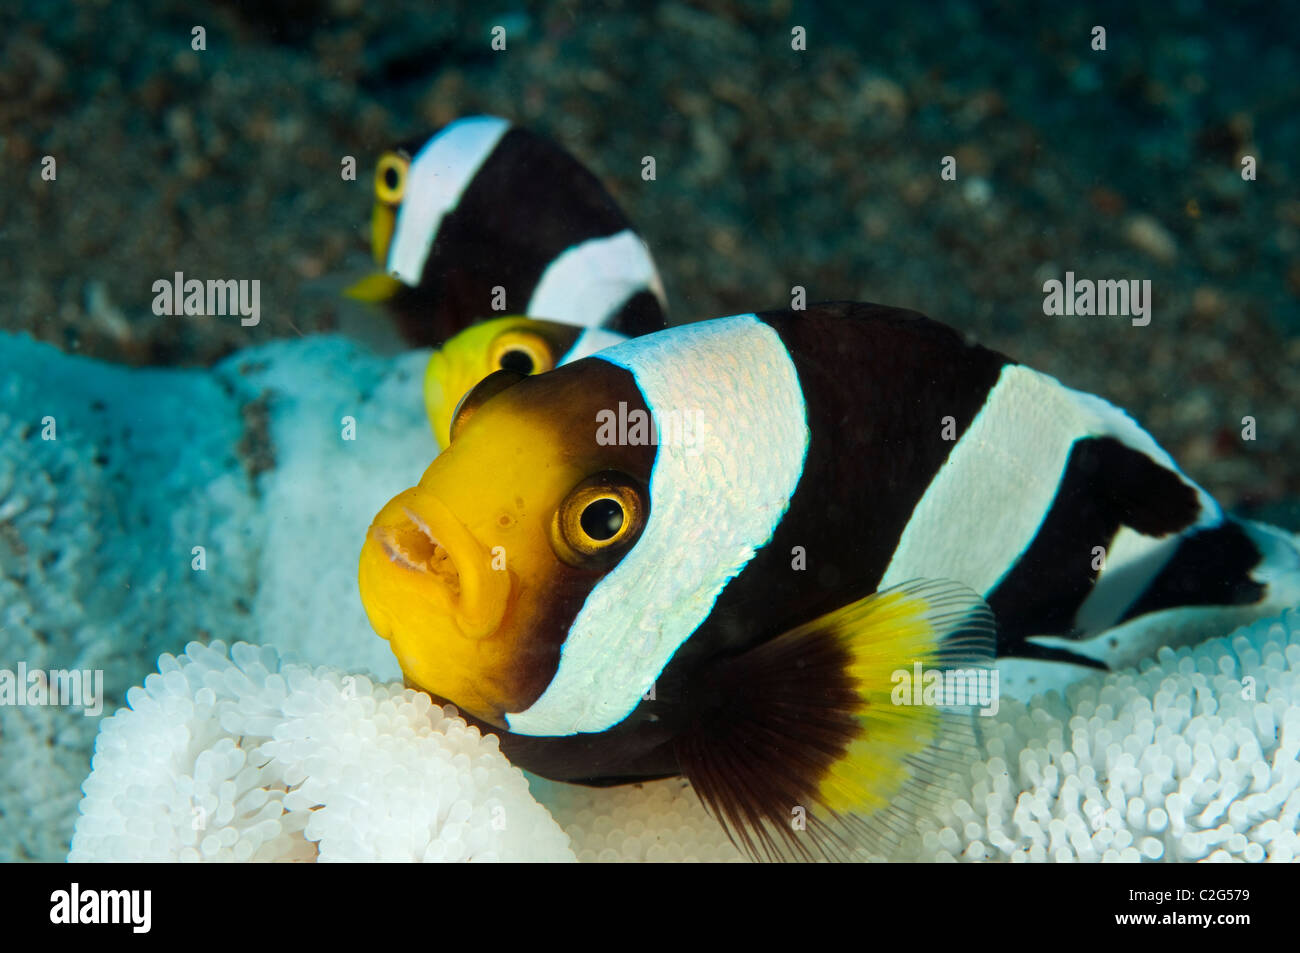 Saddleback anemonefish, Amphiprion polymnus, in a bleached anemone Sulawesi Indonesia. Stock Photo